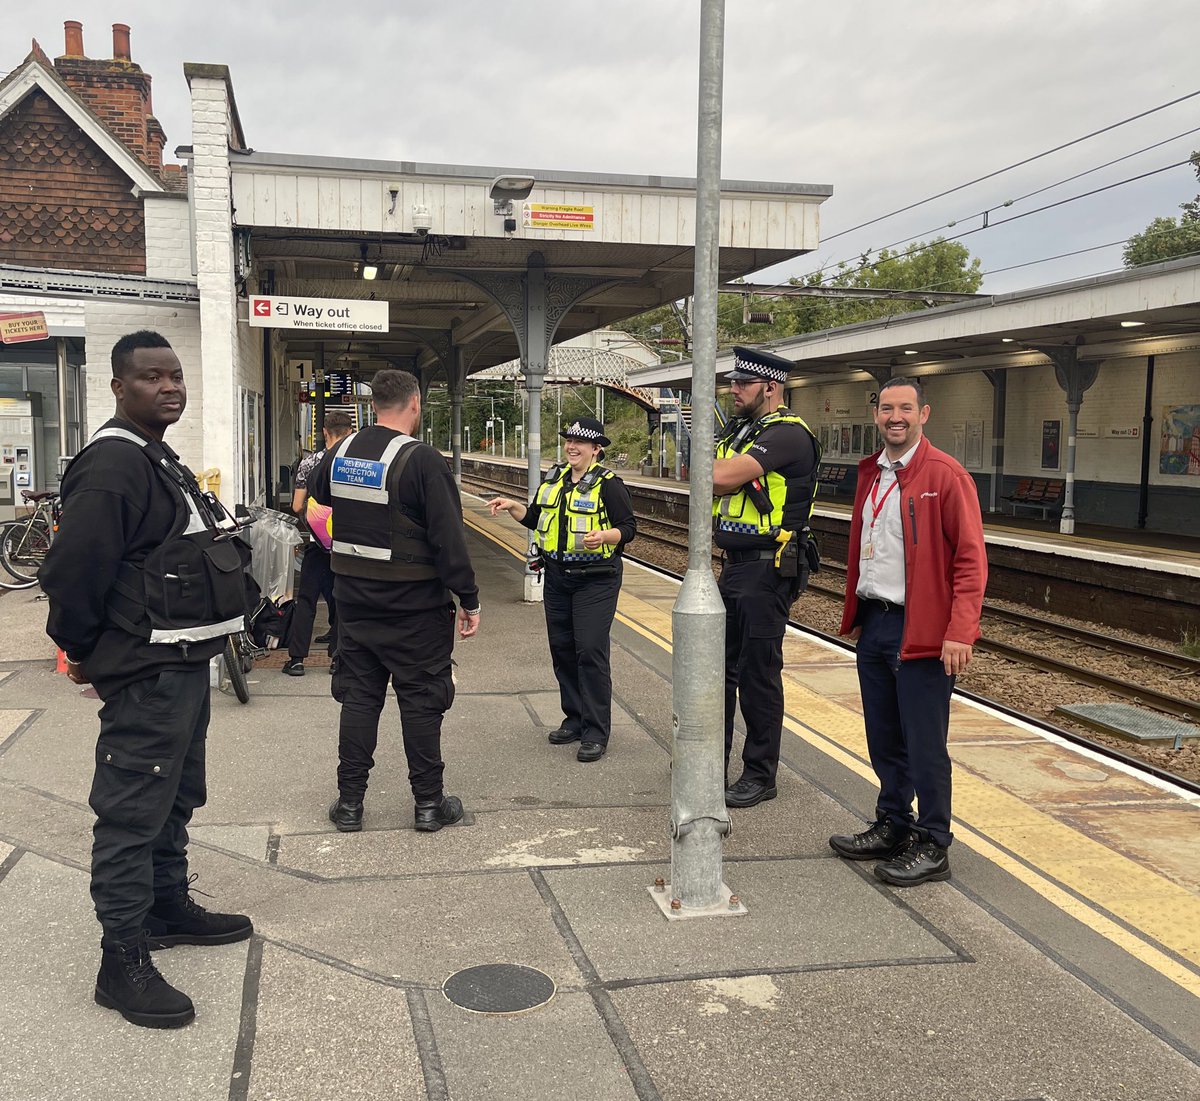 We’re out on patrol across the @greateranglia and @c2c_Rail networks this afternoon. 

Whilst out on patrol we’ve bumped into colleagues from @greateranglia and @LandSheriffs at #Prittlewell Station. 

- Text 61016 📳
- App #RailwayGuardian 📱 
- Emergency 999 📞🚨